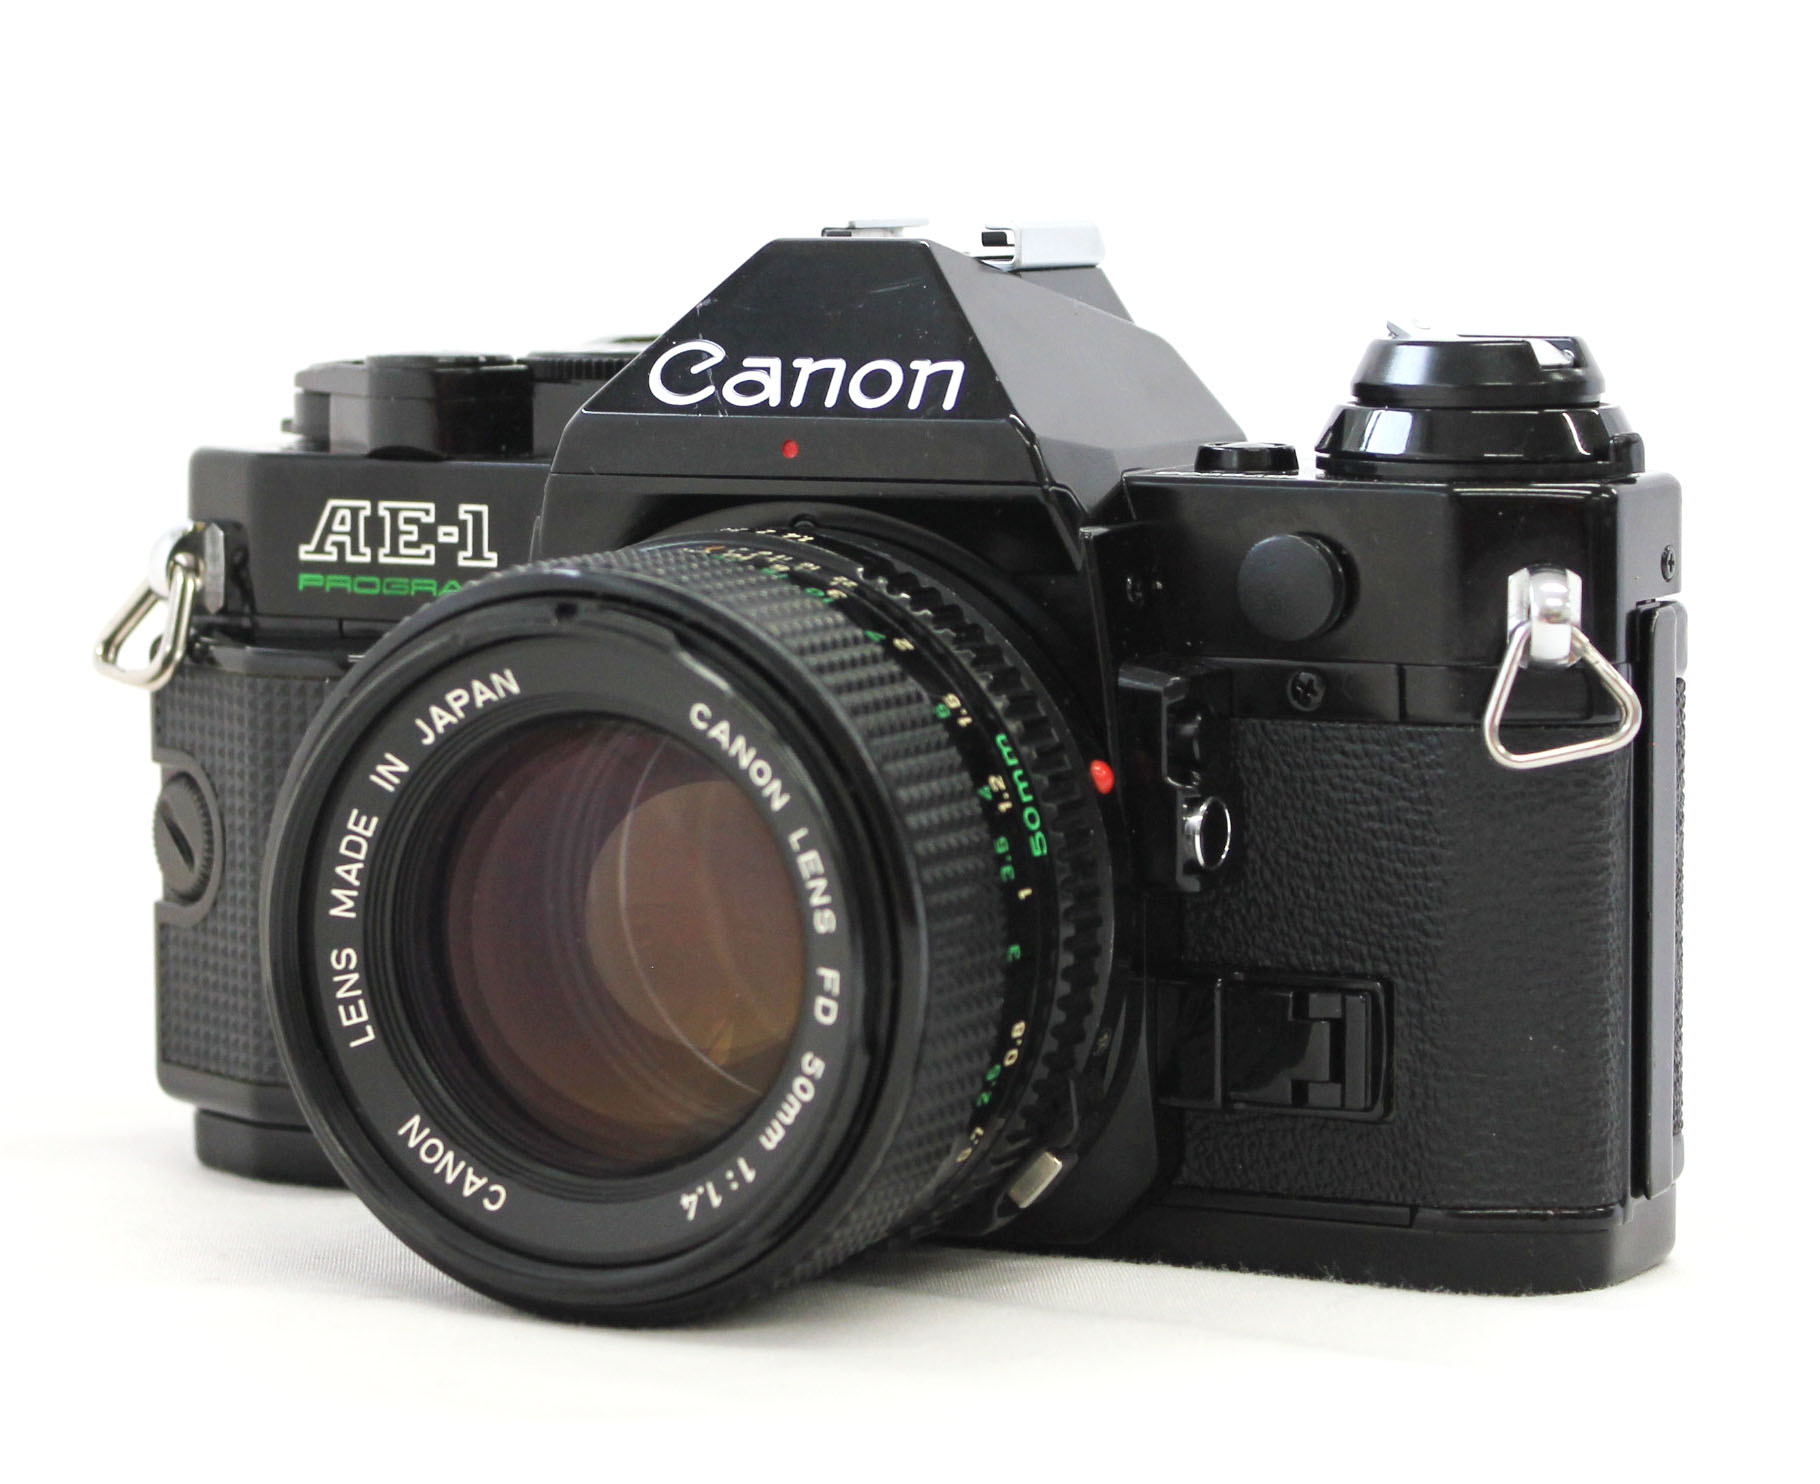 Japan Used Camera Shop | Canon AE-1 Program 35mm SLR Film Camera Black with New FD 50mm F/1.4 Lens from Japan